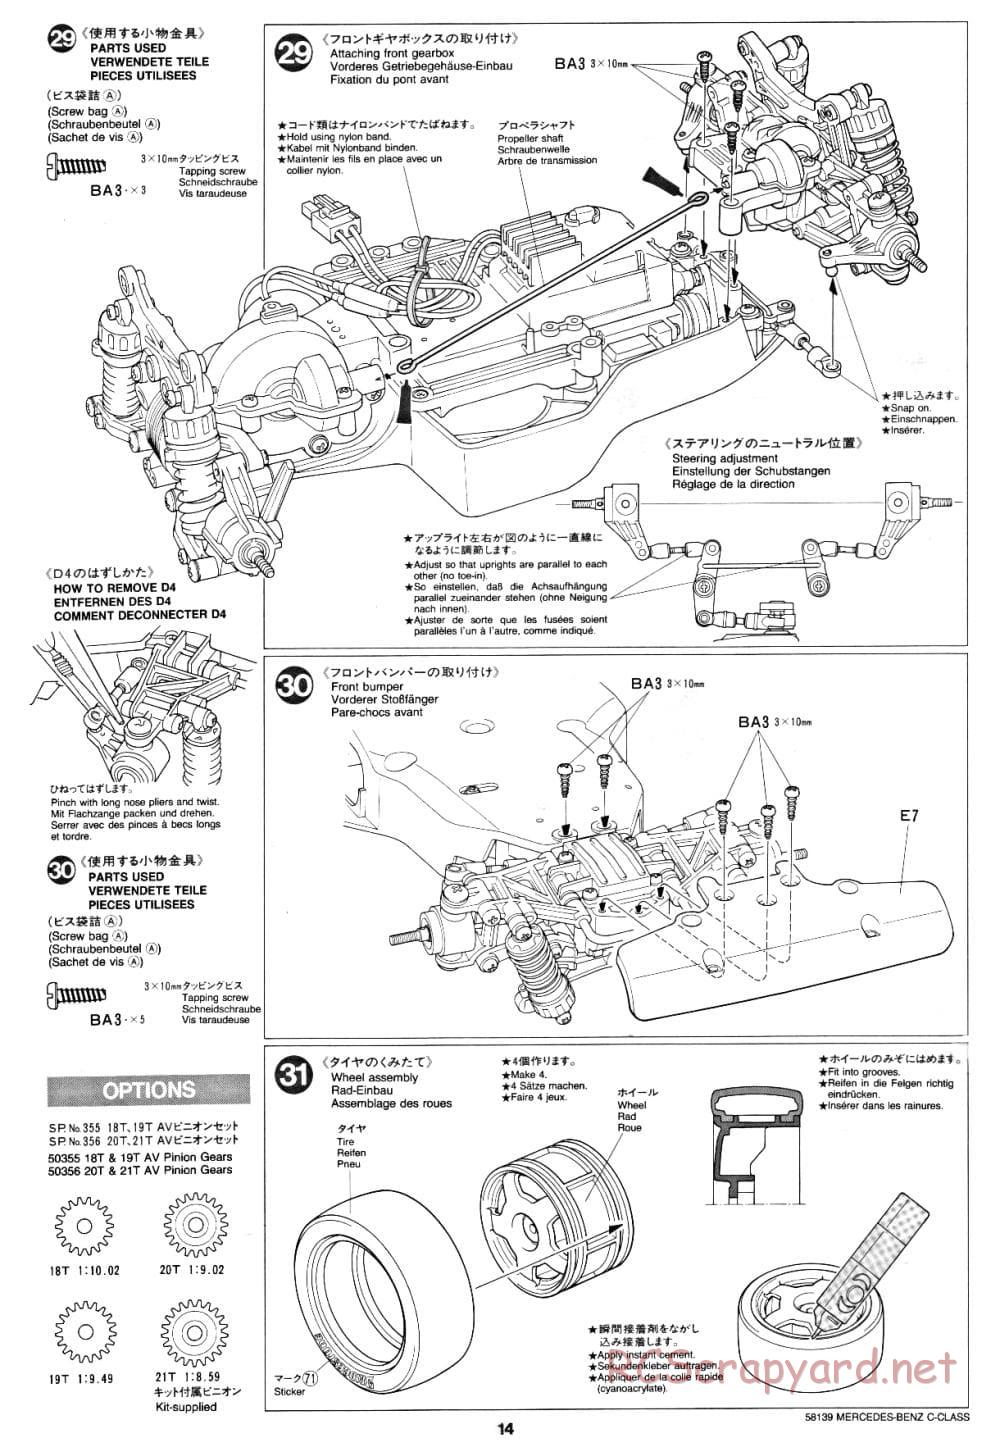 Tamiya - AMG Mercedes-Benz C-Class DTM D2 - TA-02 Chassis - Manual - Page 14